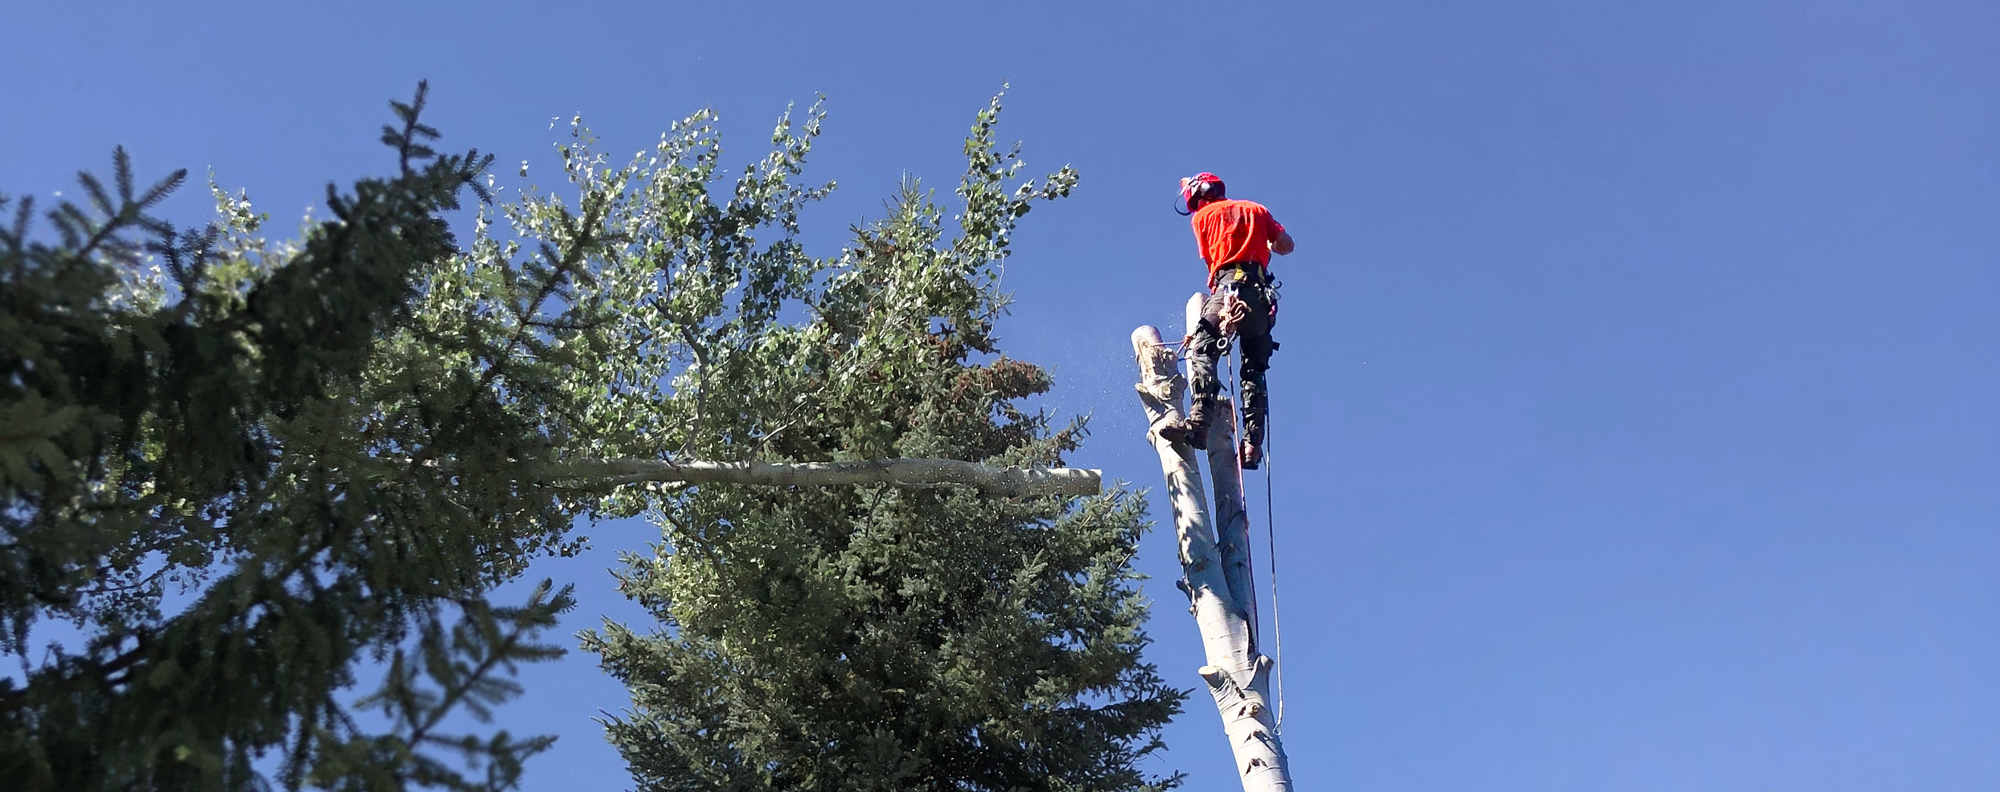 A Garibaldi Tree employee is cutting a down a tree in Pemberton, B.C. They are harnessed to the tree and have just cut the top of it off, which is falling to the ground.